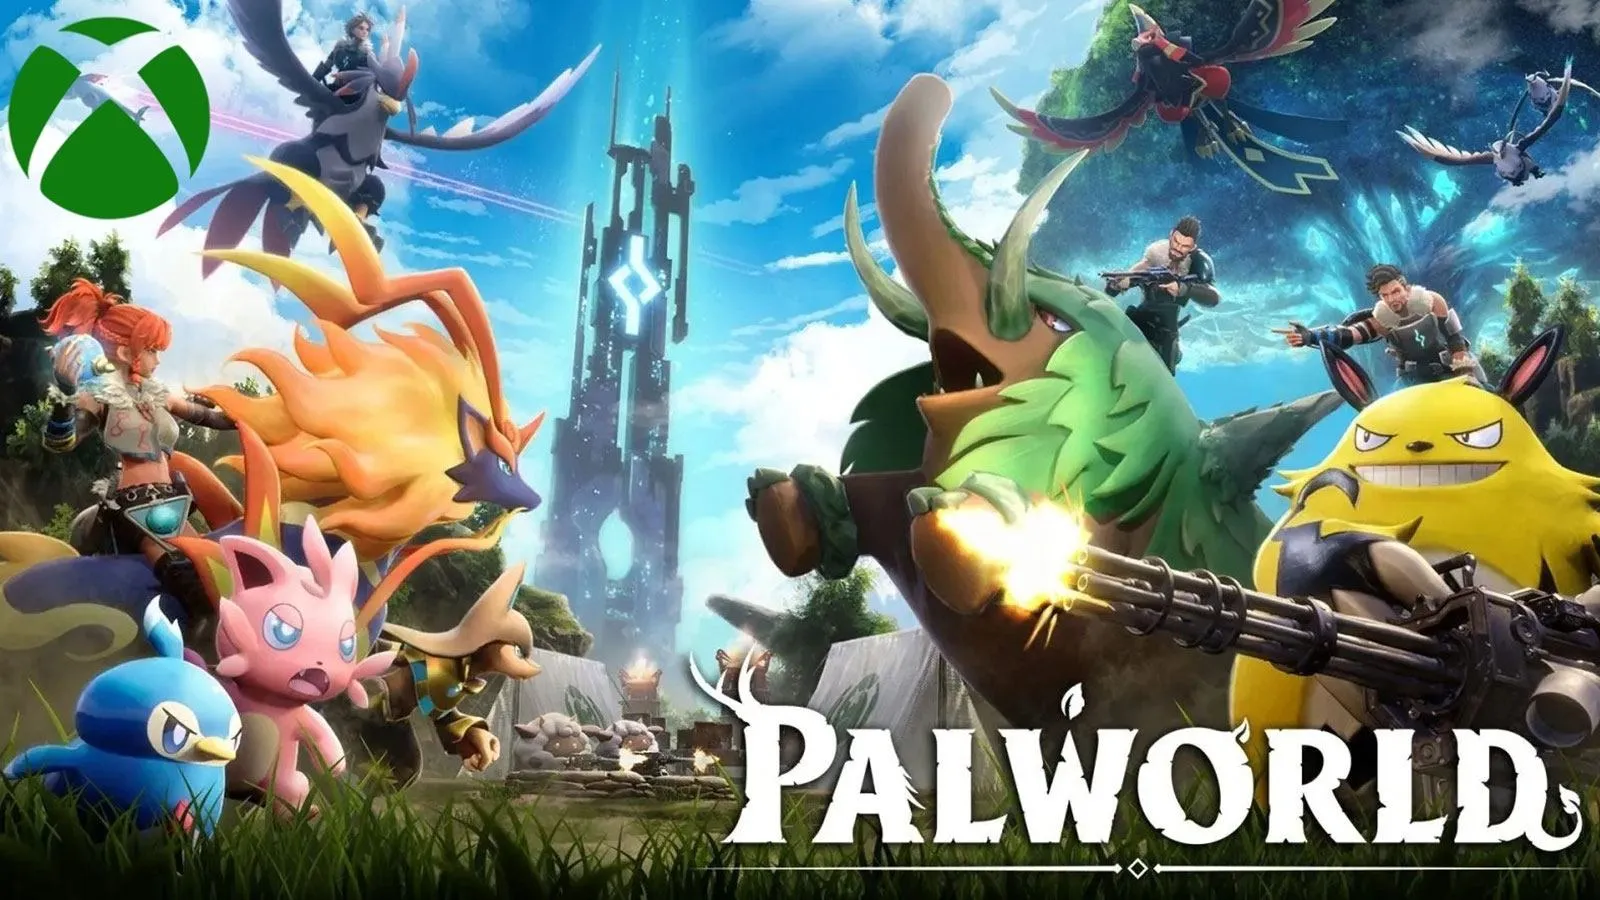 Xbox reportedly used Palworld as an example of its cross-platform...